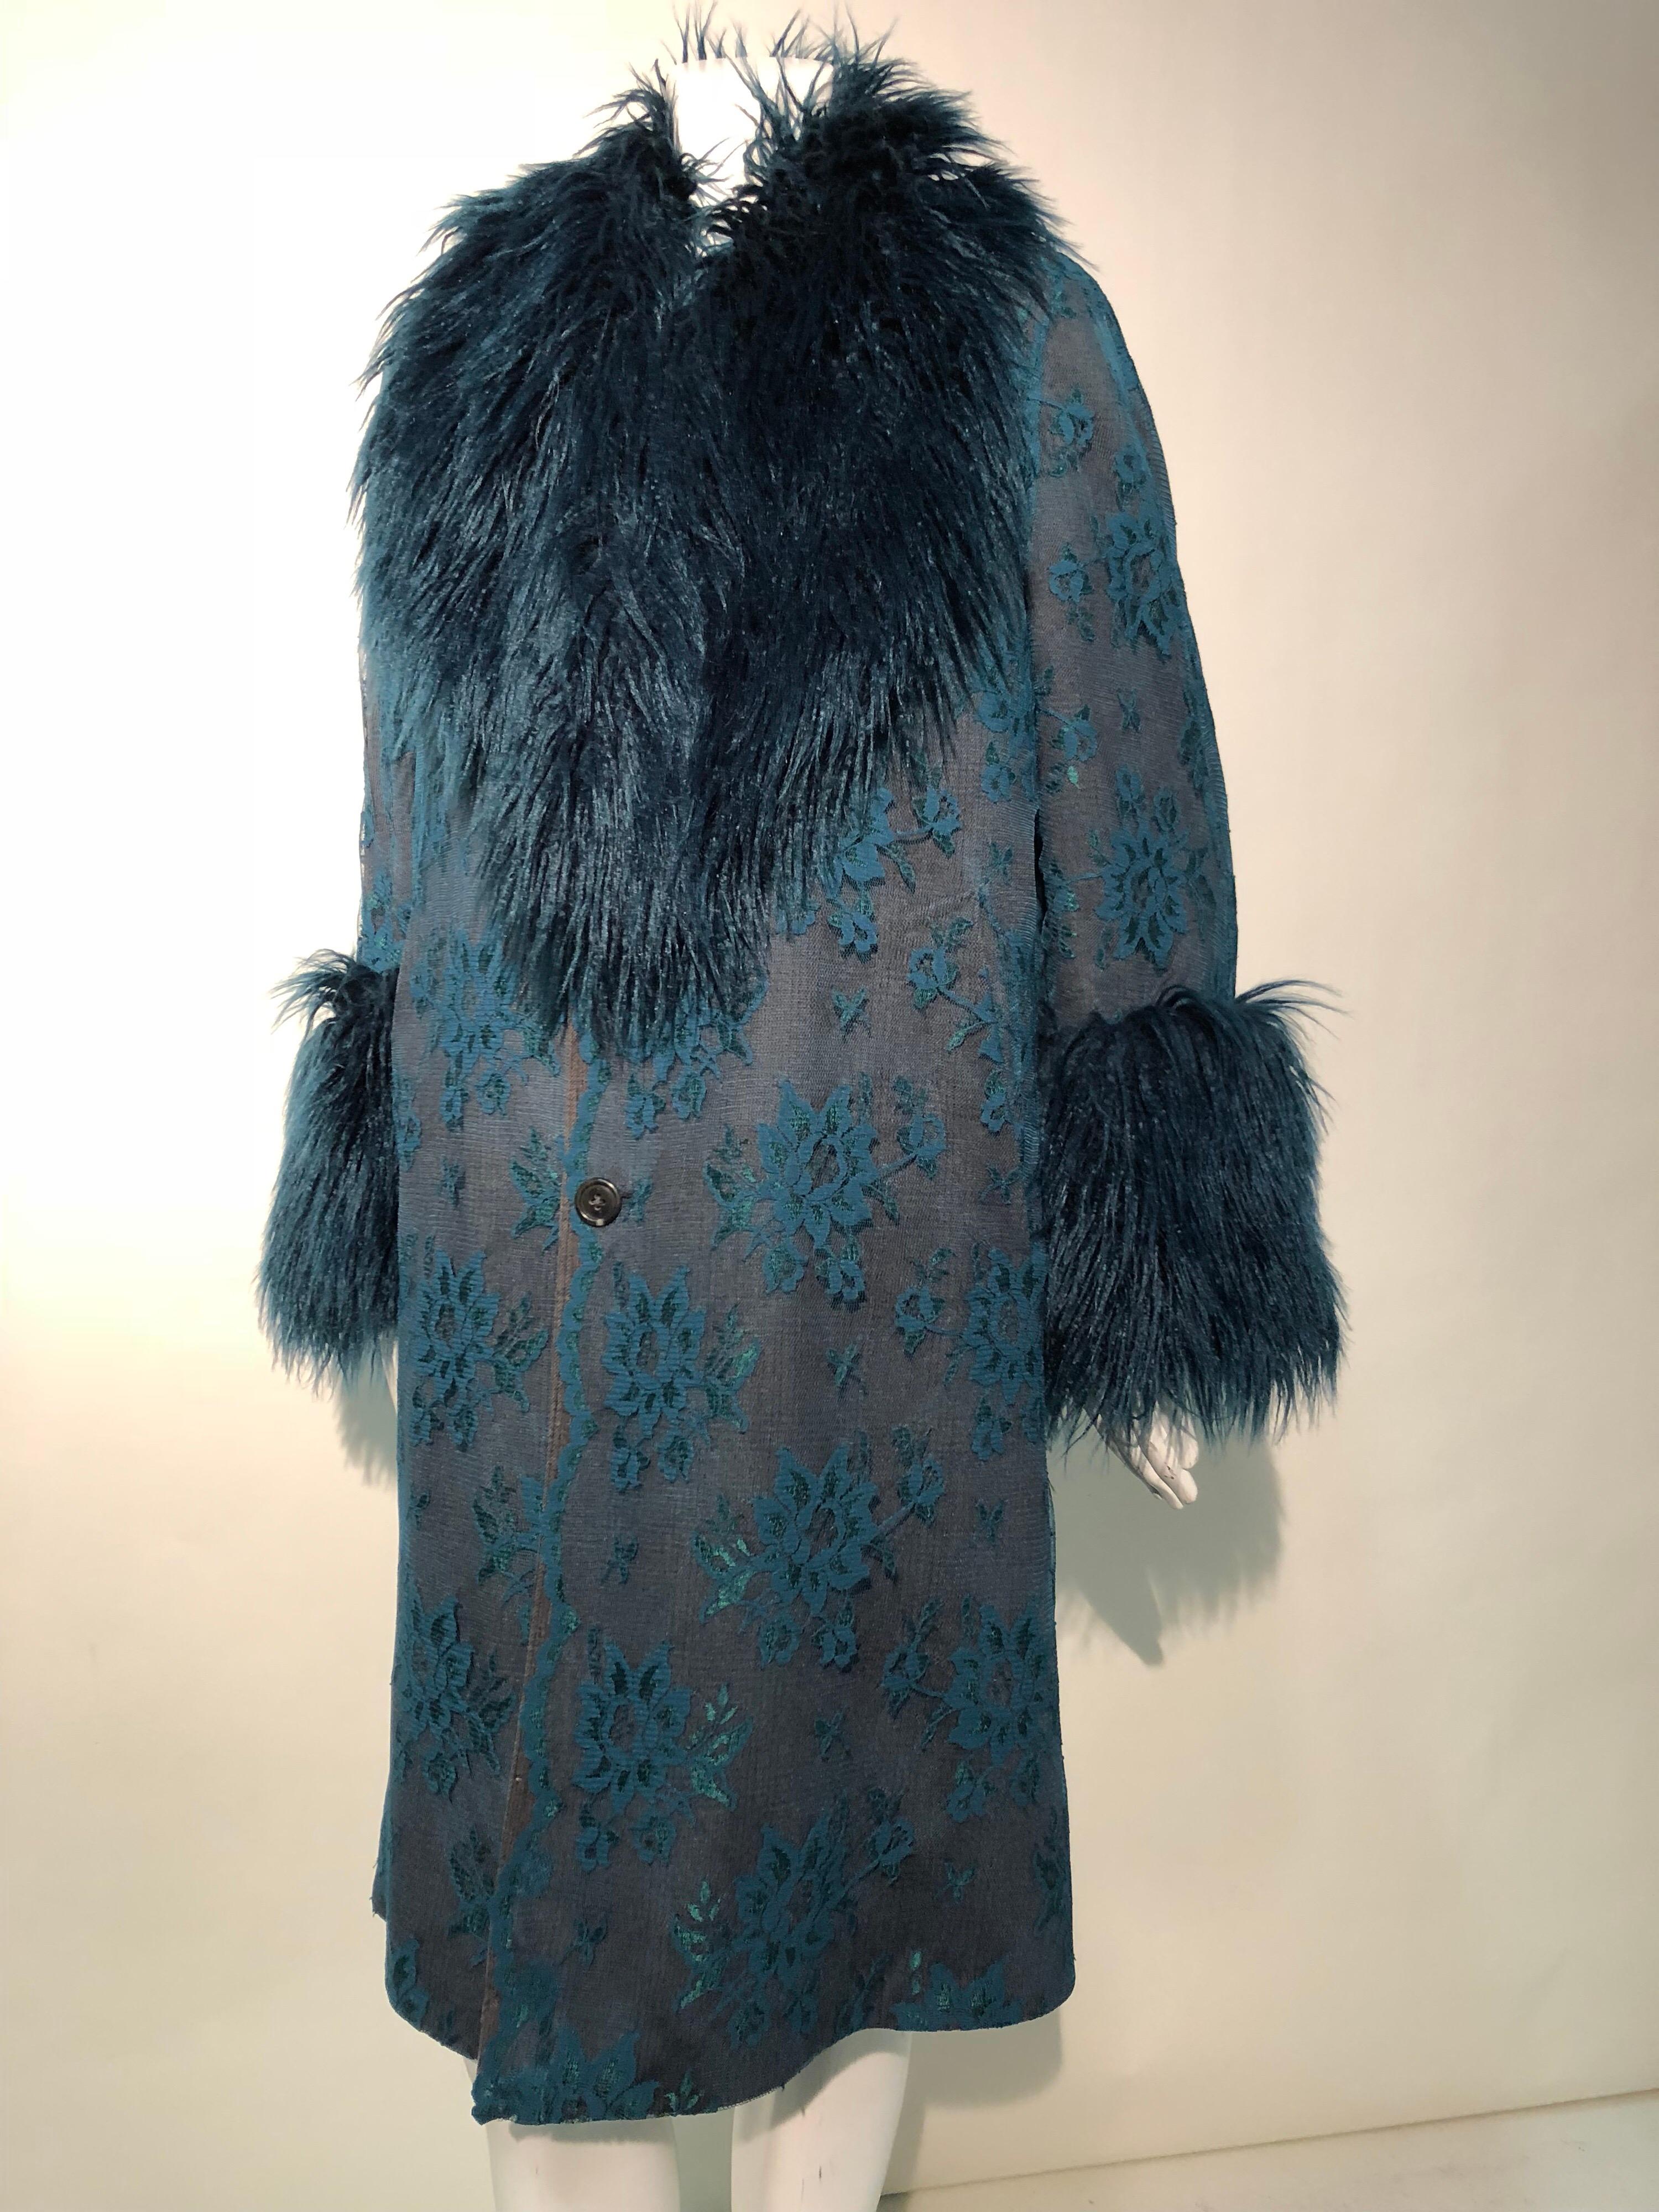 Women's or Men's Torso Creations 1950s Grey Wool Coat W/ Teal Lace Overlay & Coordinated Faux Fur